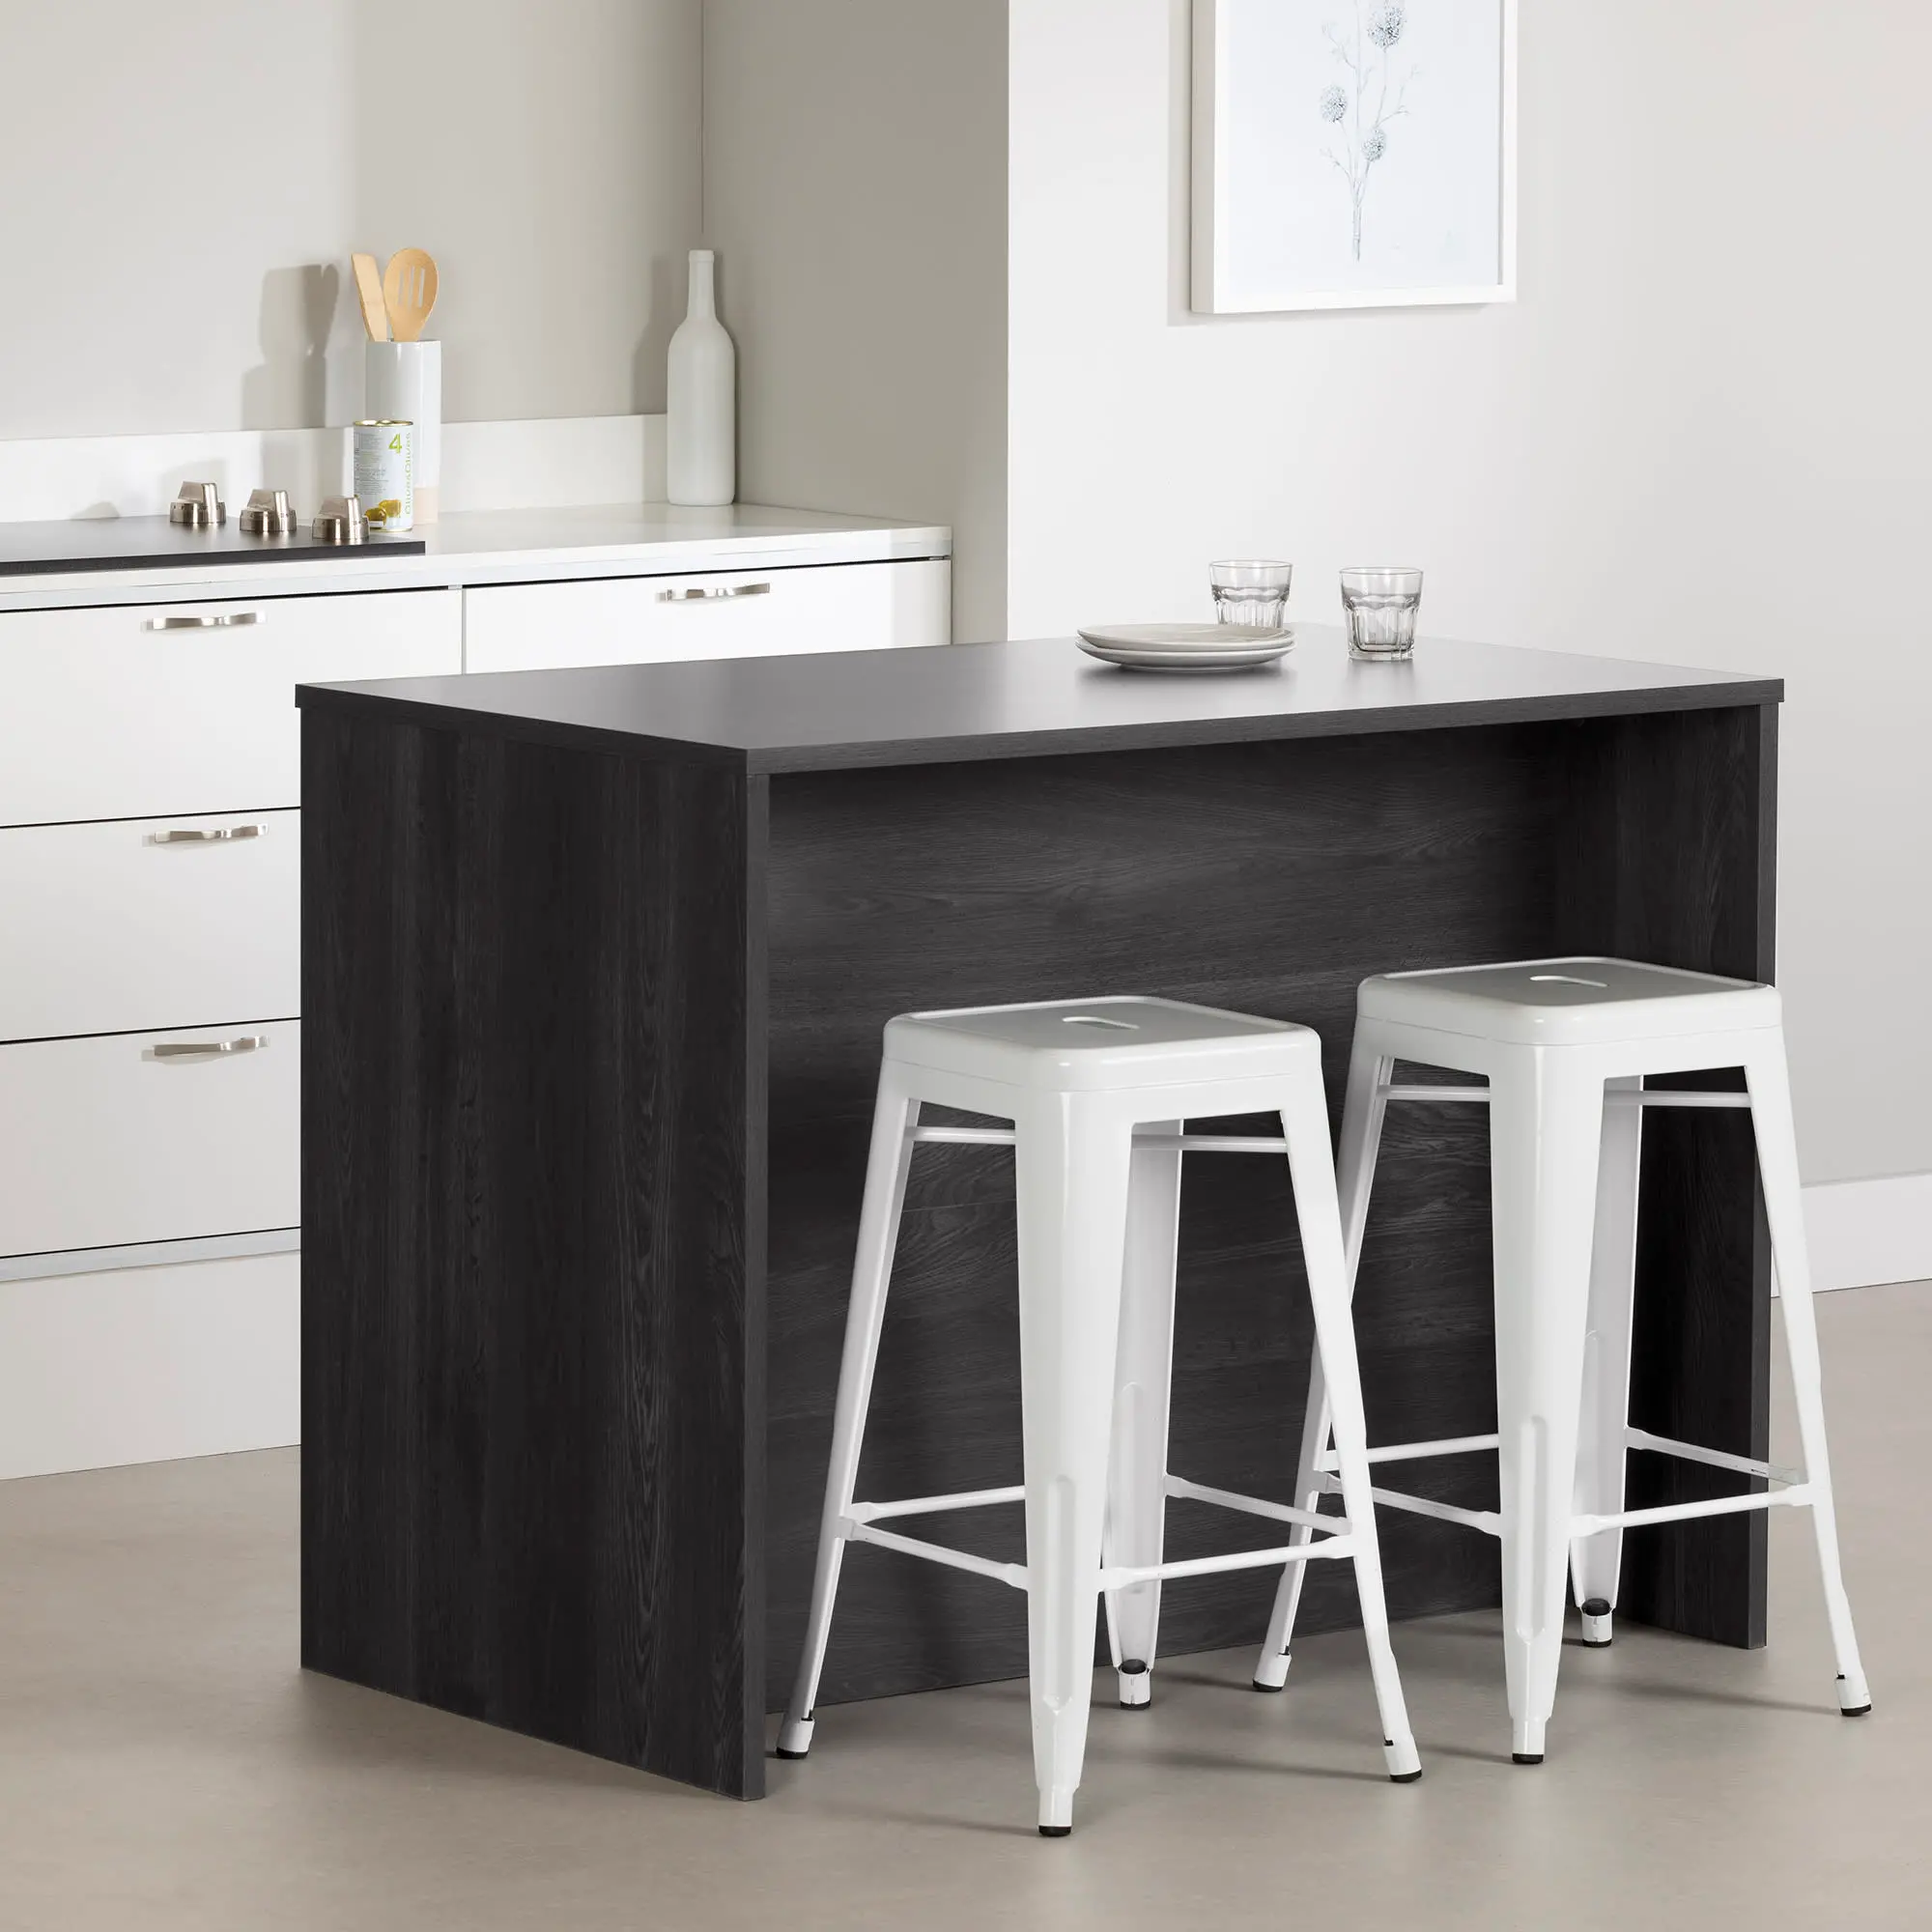 Myro Charcoal and White Kitchen Island - South Shore